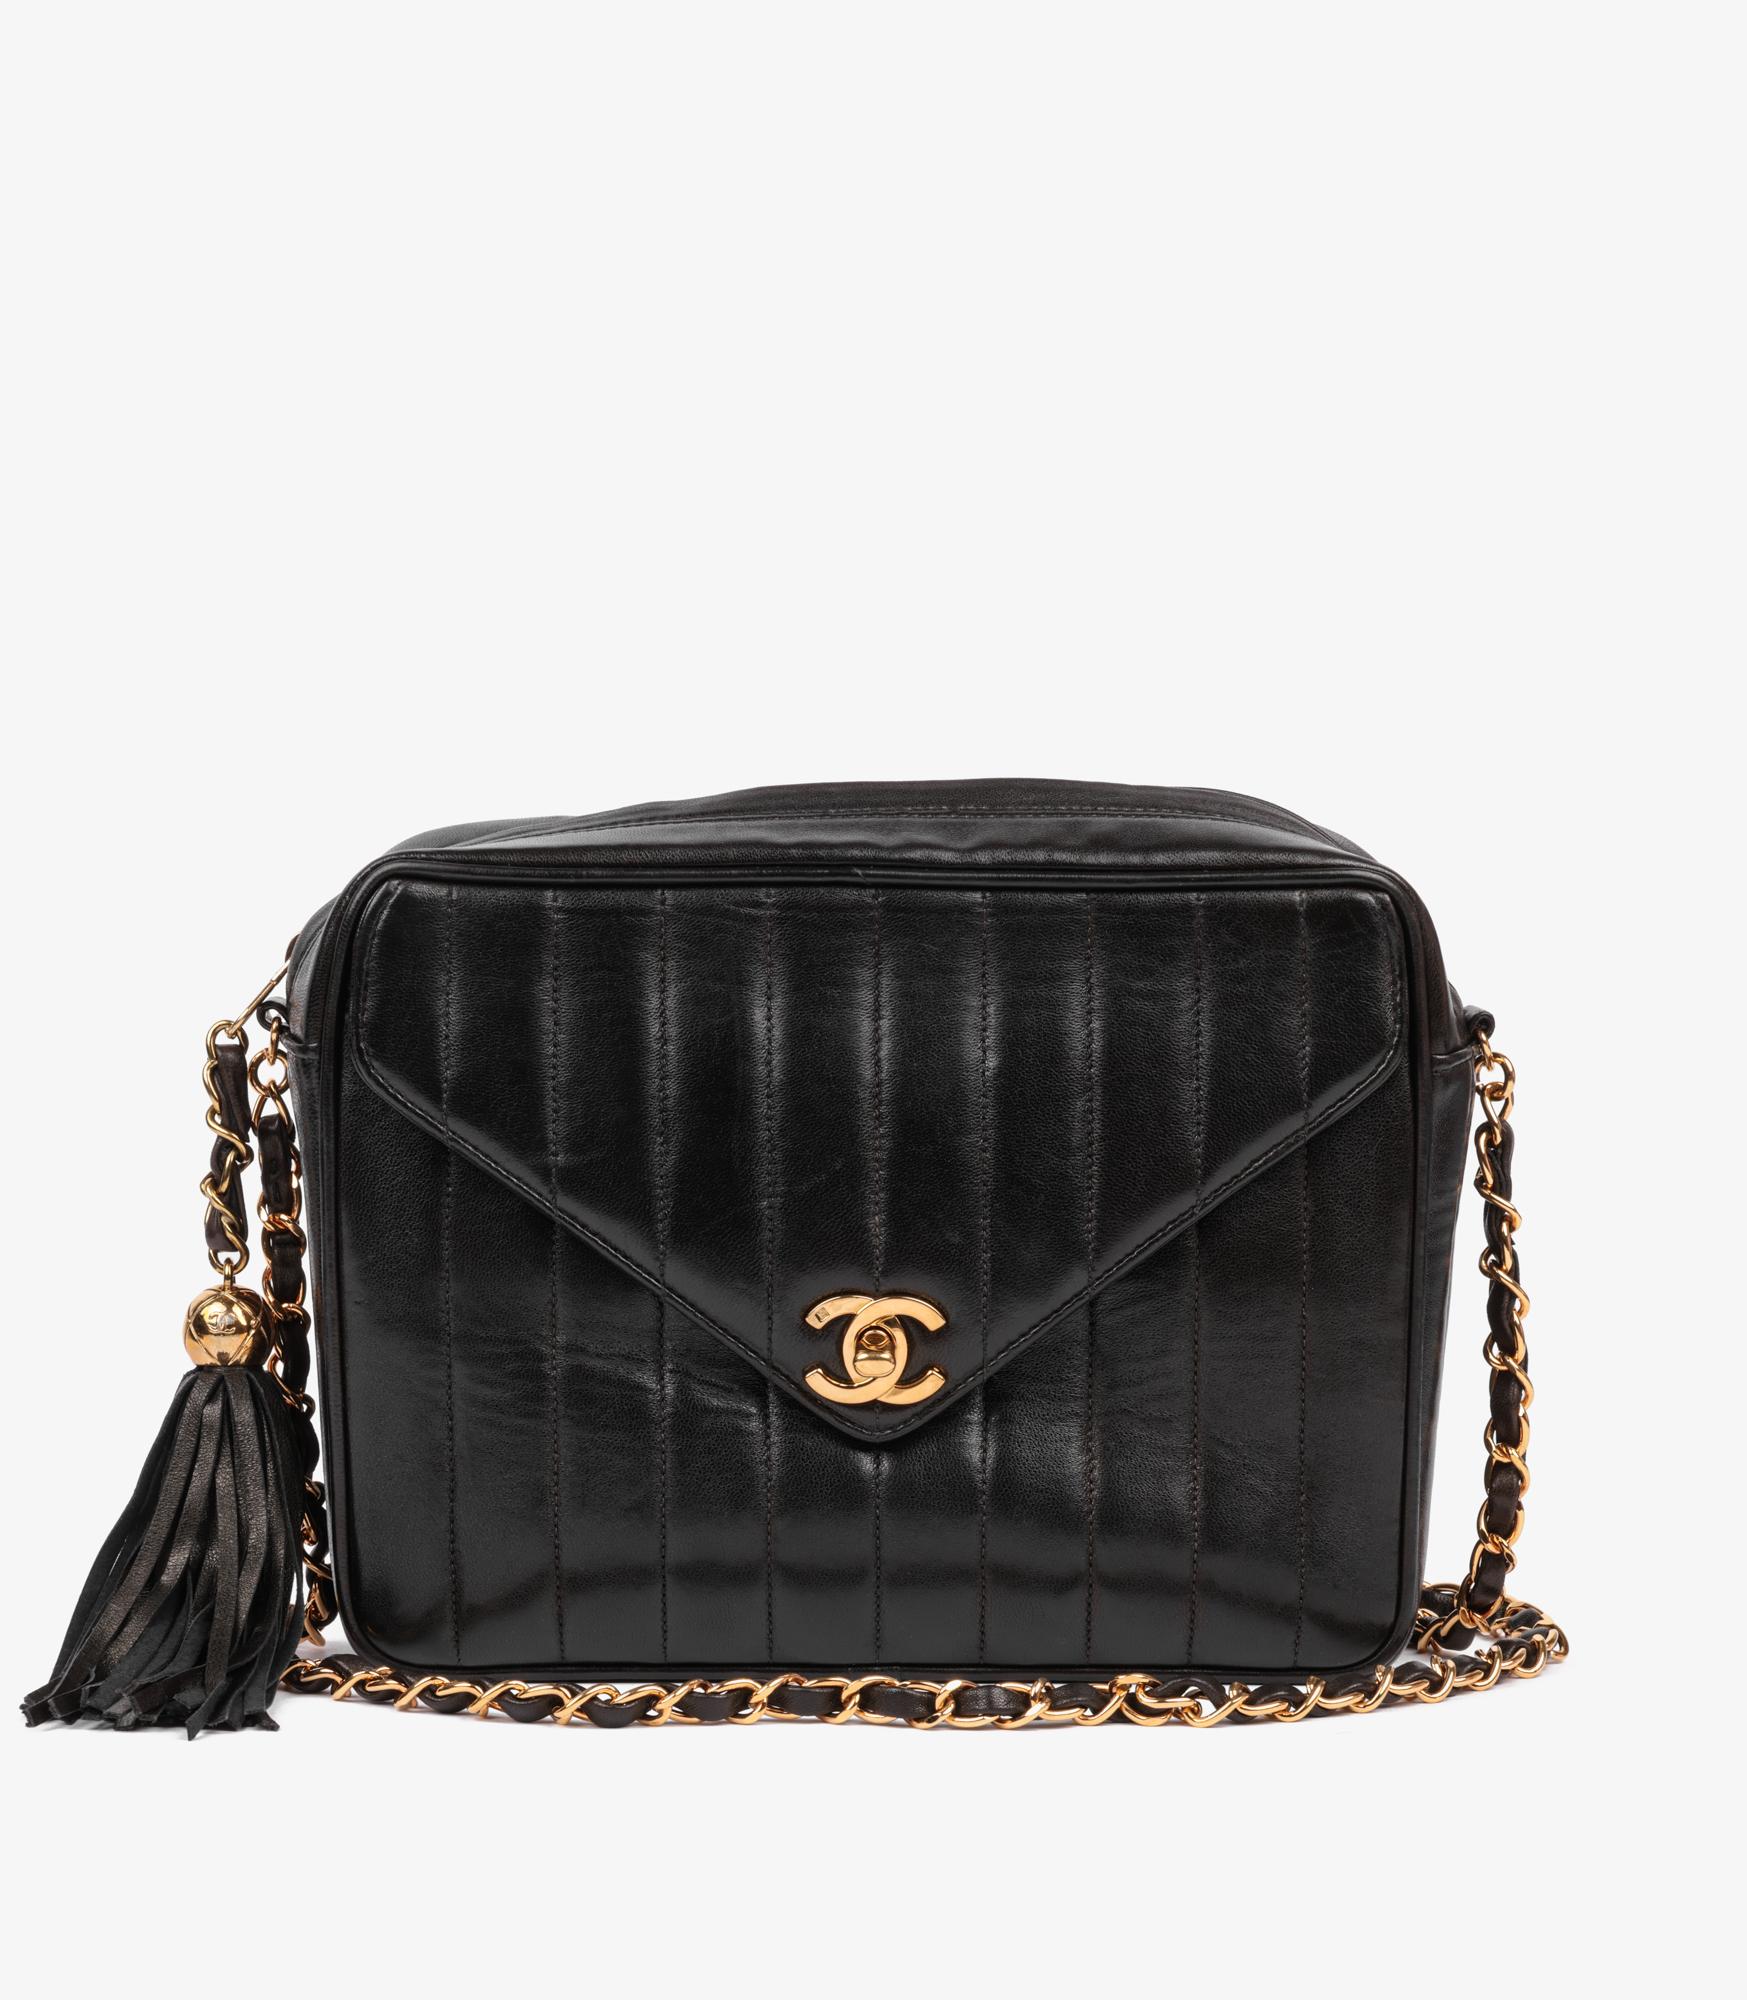 Chanel Black Vertical Quilted Lambskin Vintage Small Fringe Classic Camera Bag

Brand- Chanel
Model- Small Fringe Classic Camera Bag
Product Type- Crossbody, Shoulder
Serial Number- 2911597
Age- Circa 1991
Accompanied By- Chanel Dust Bag,